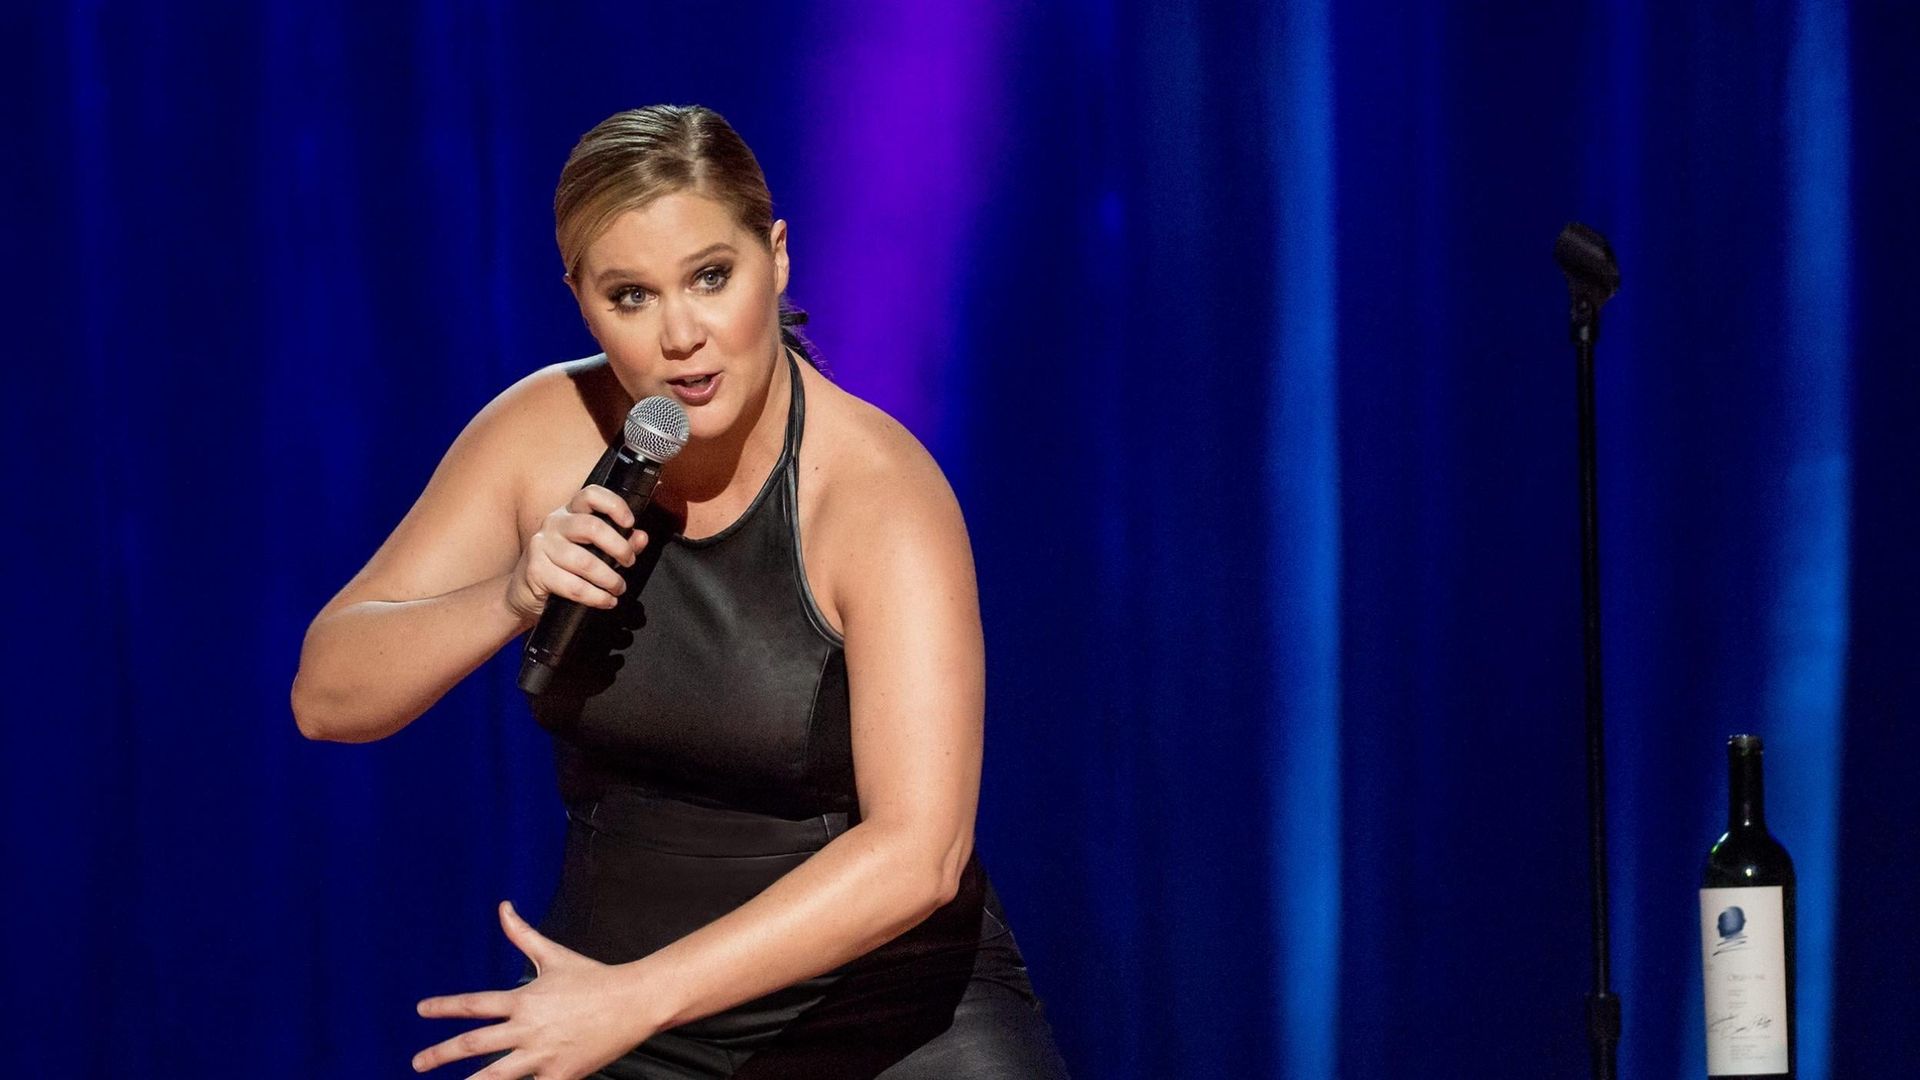 Amy Schumer: The Leather Special background